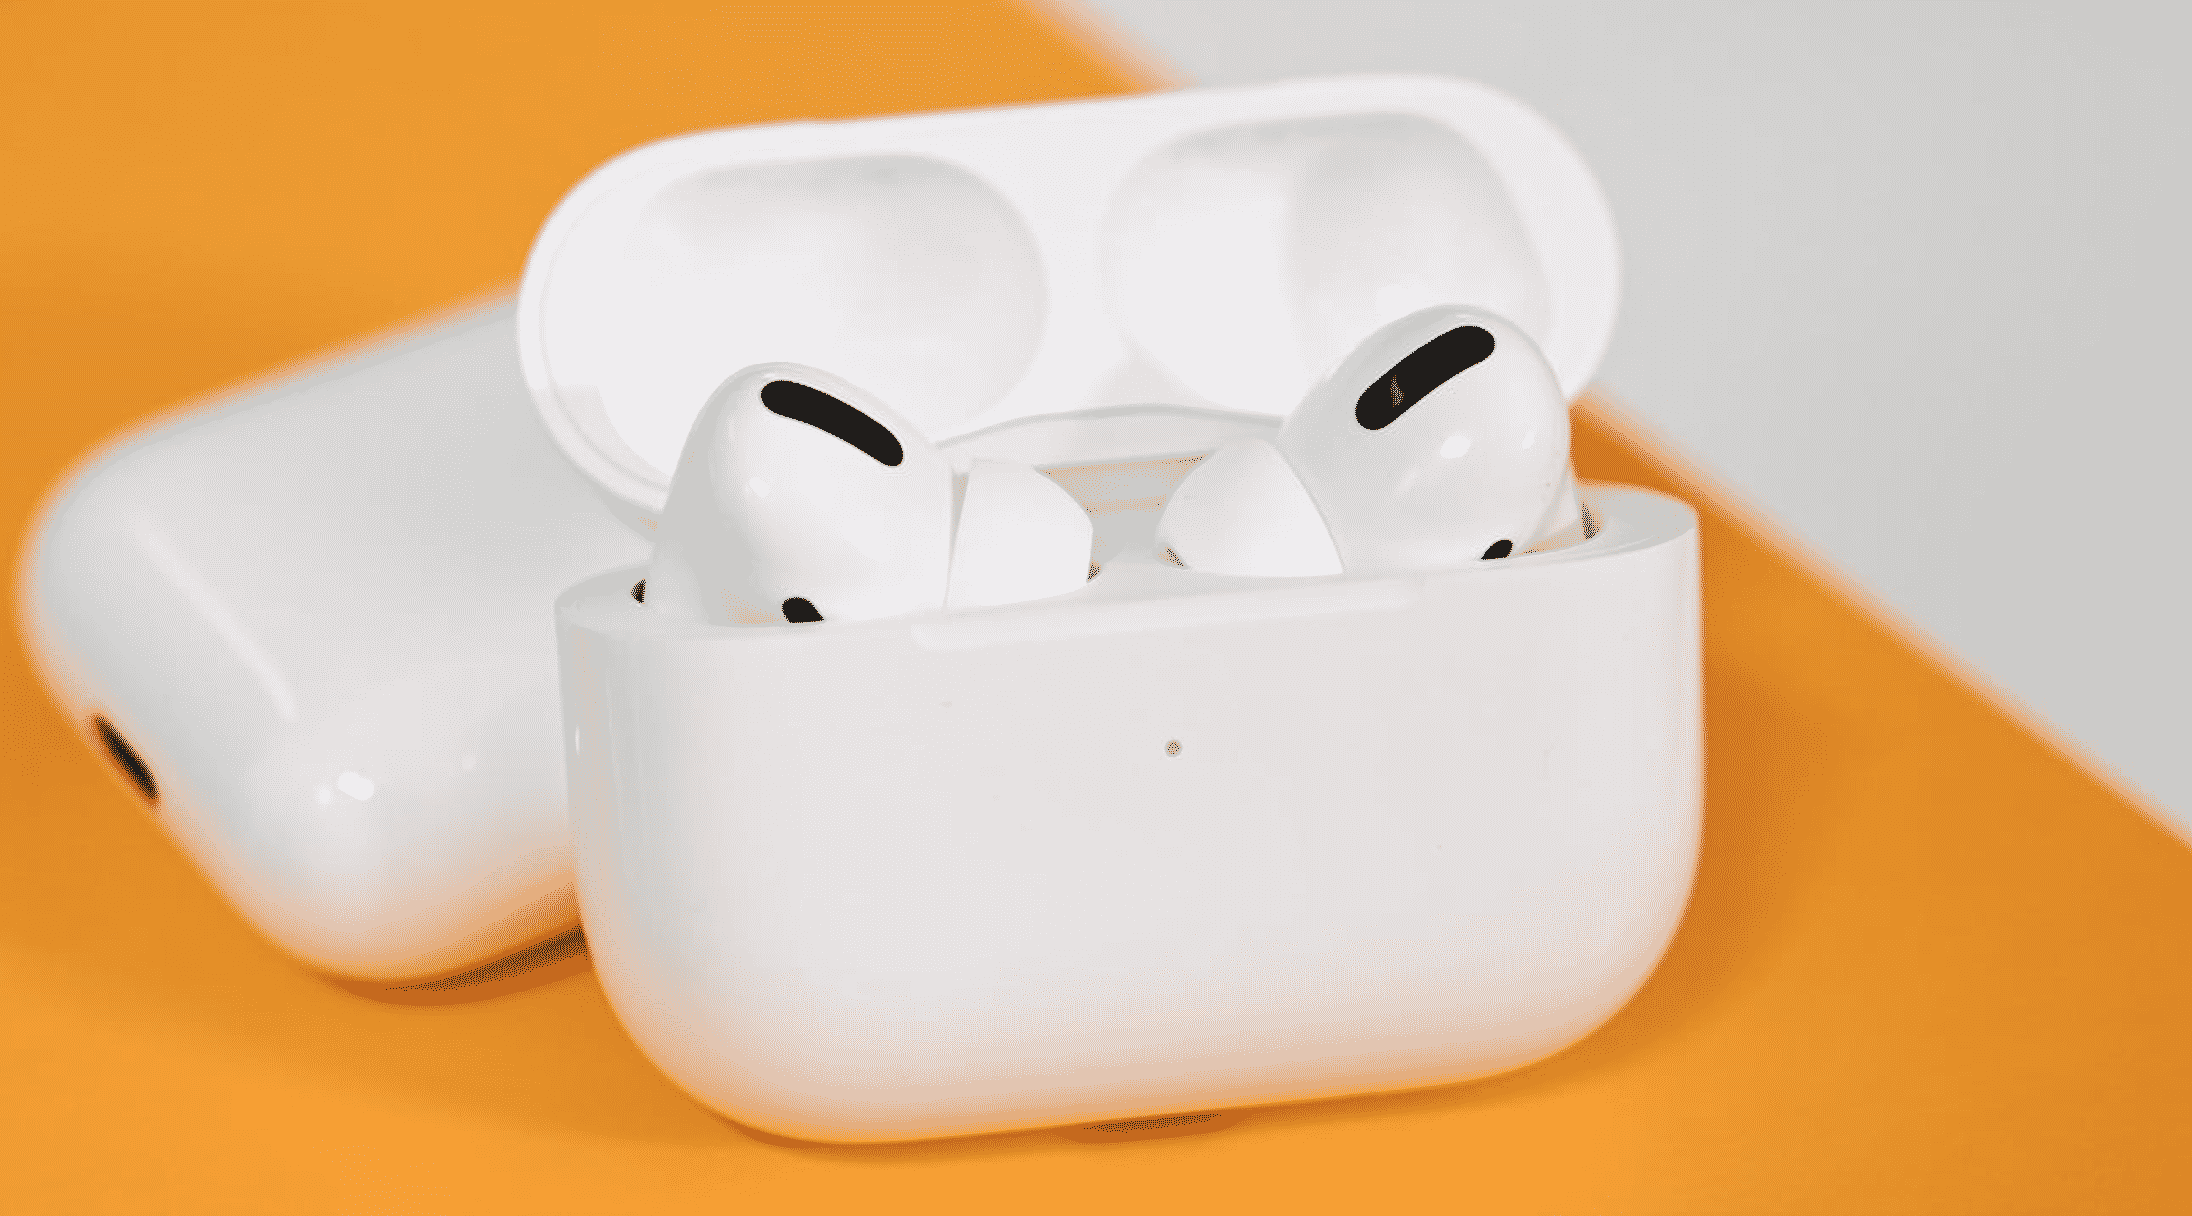 Where was the new AirPods commercial filmed?